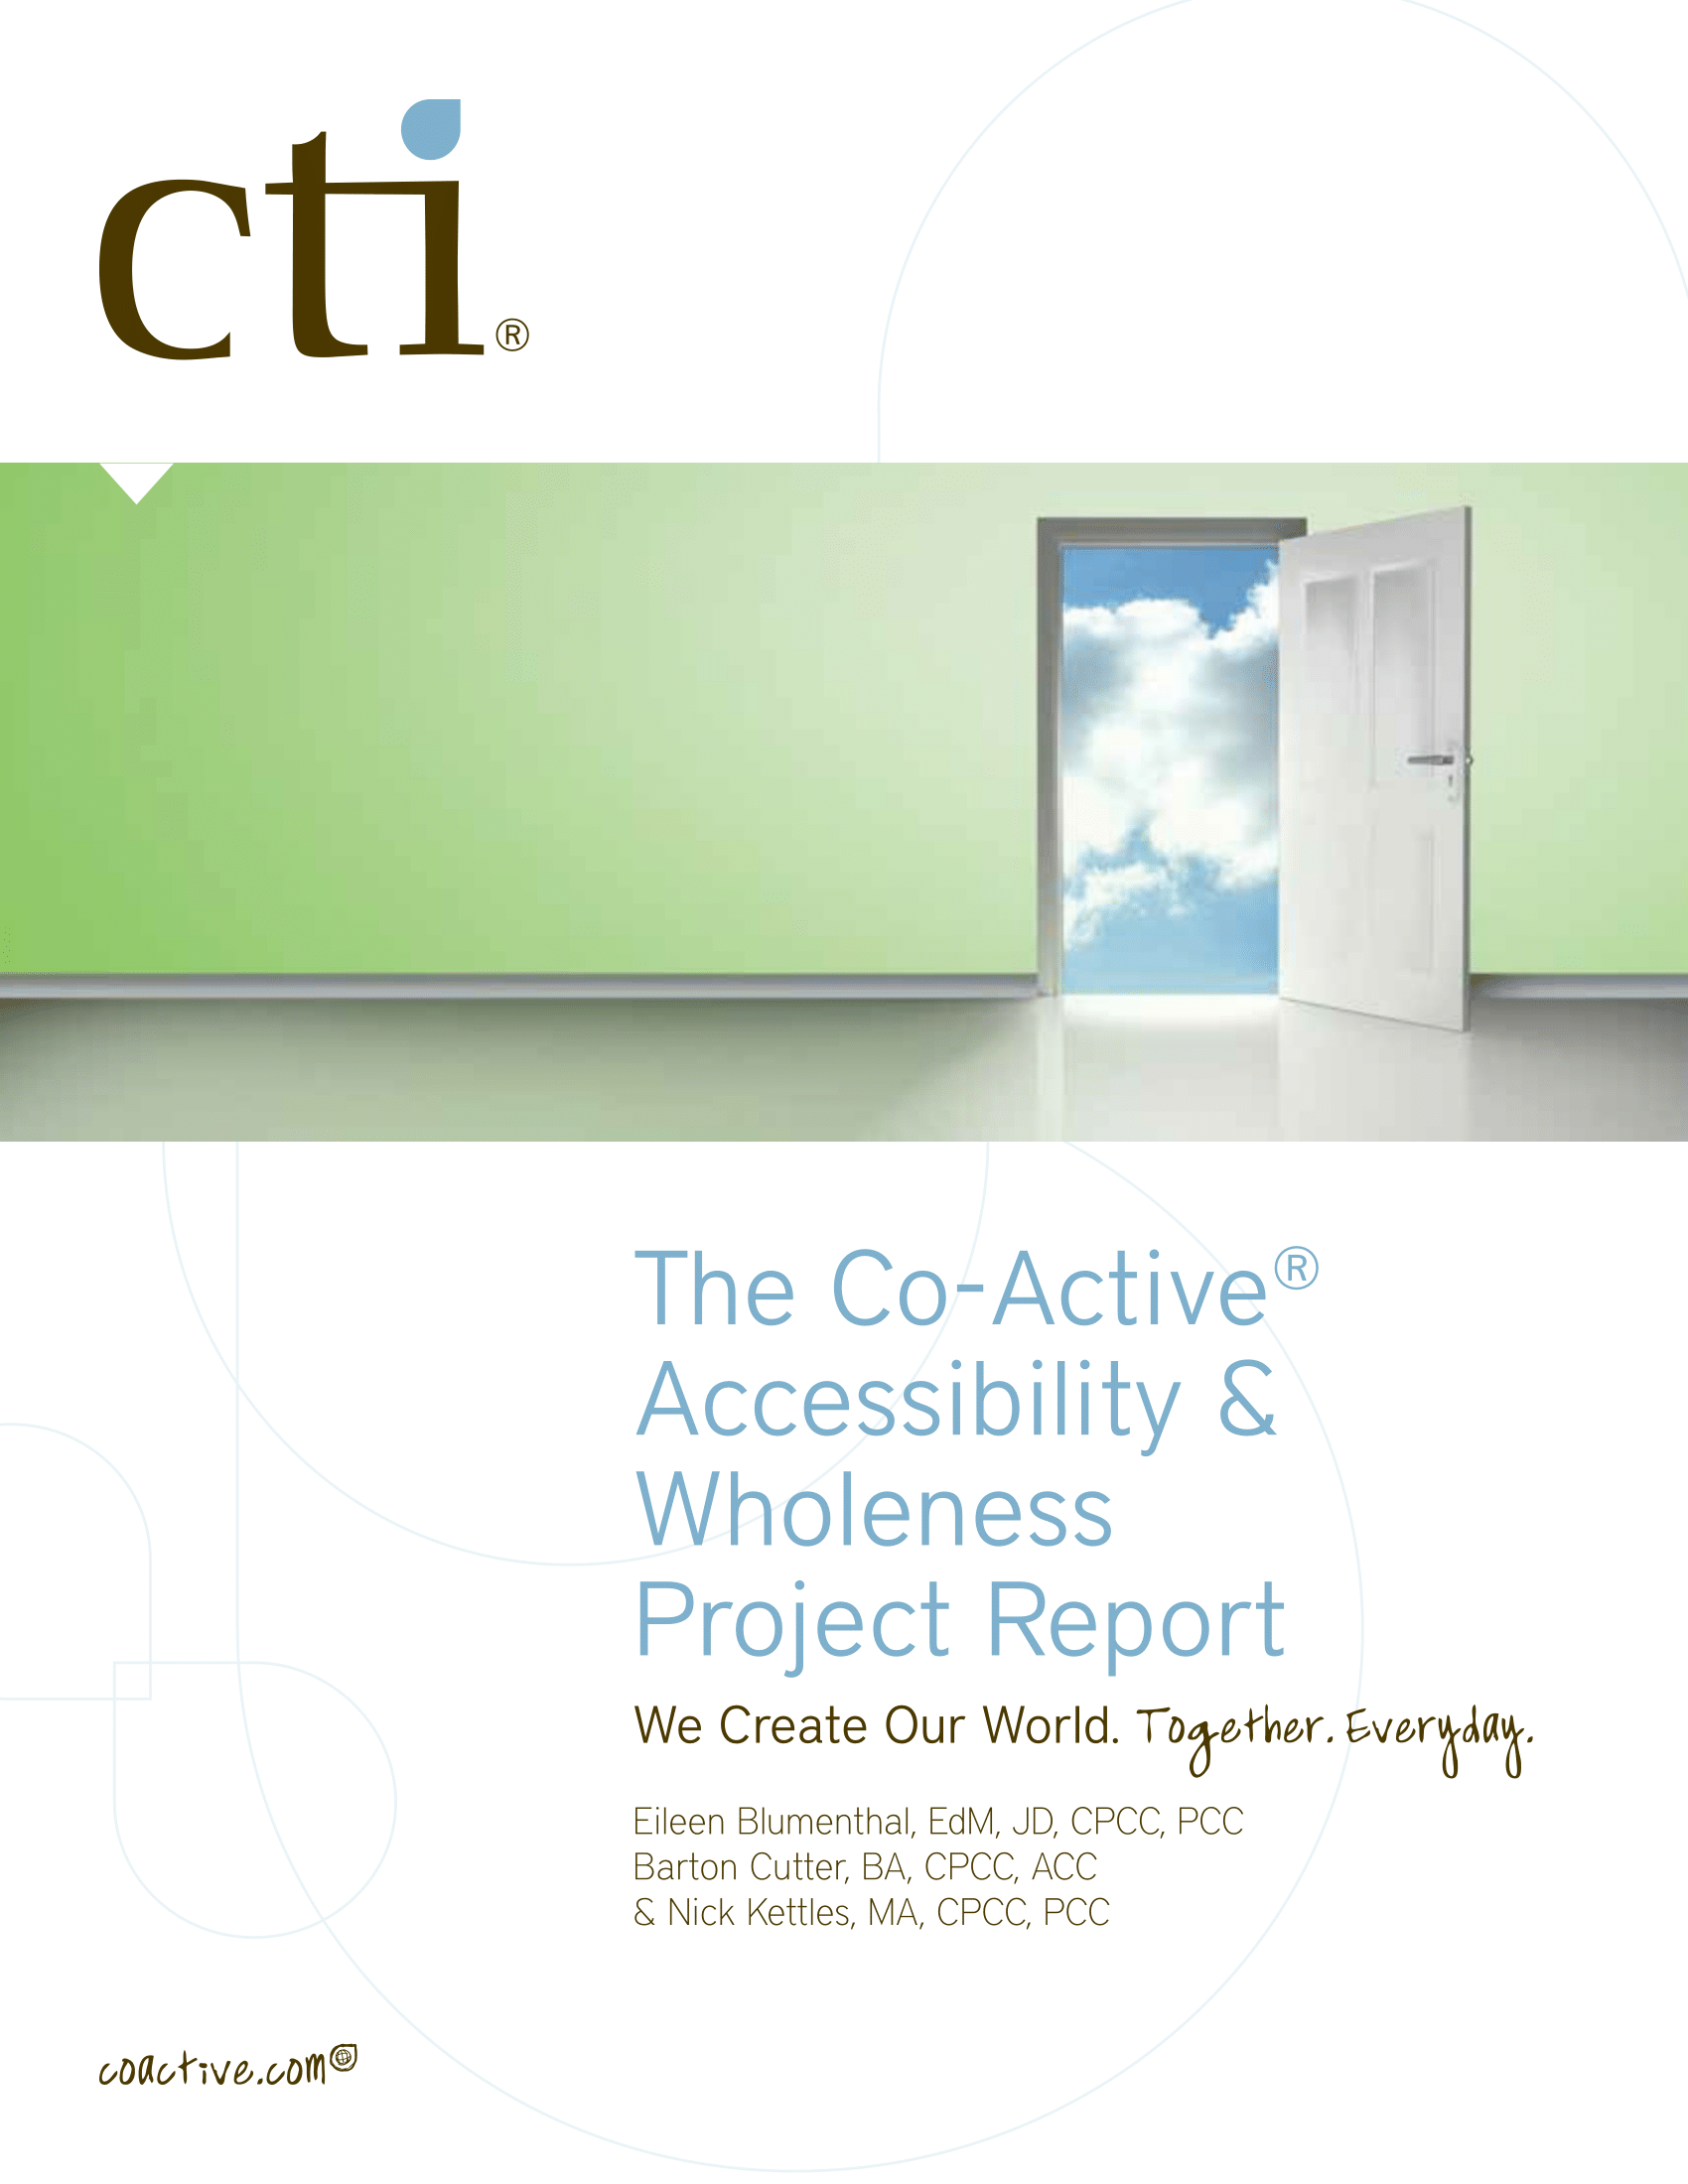 CTI's Co-Active Accessibility and Wholeness Project (CAWP) Report provides new perspectives on designing accommodations that meet the accessibility challenges of an individual.